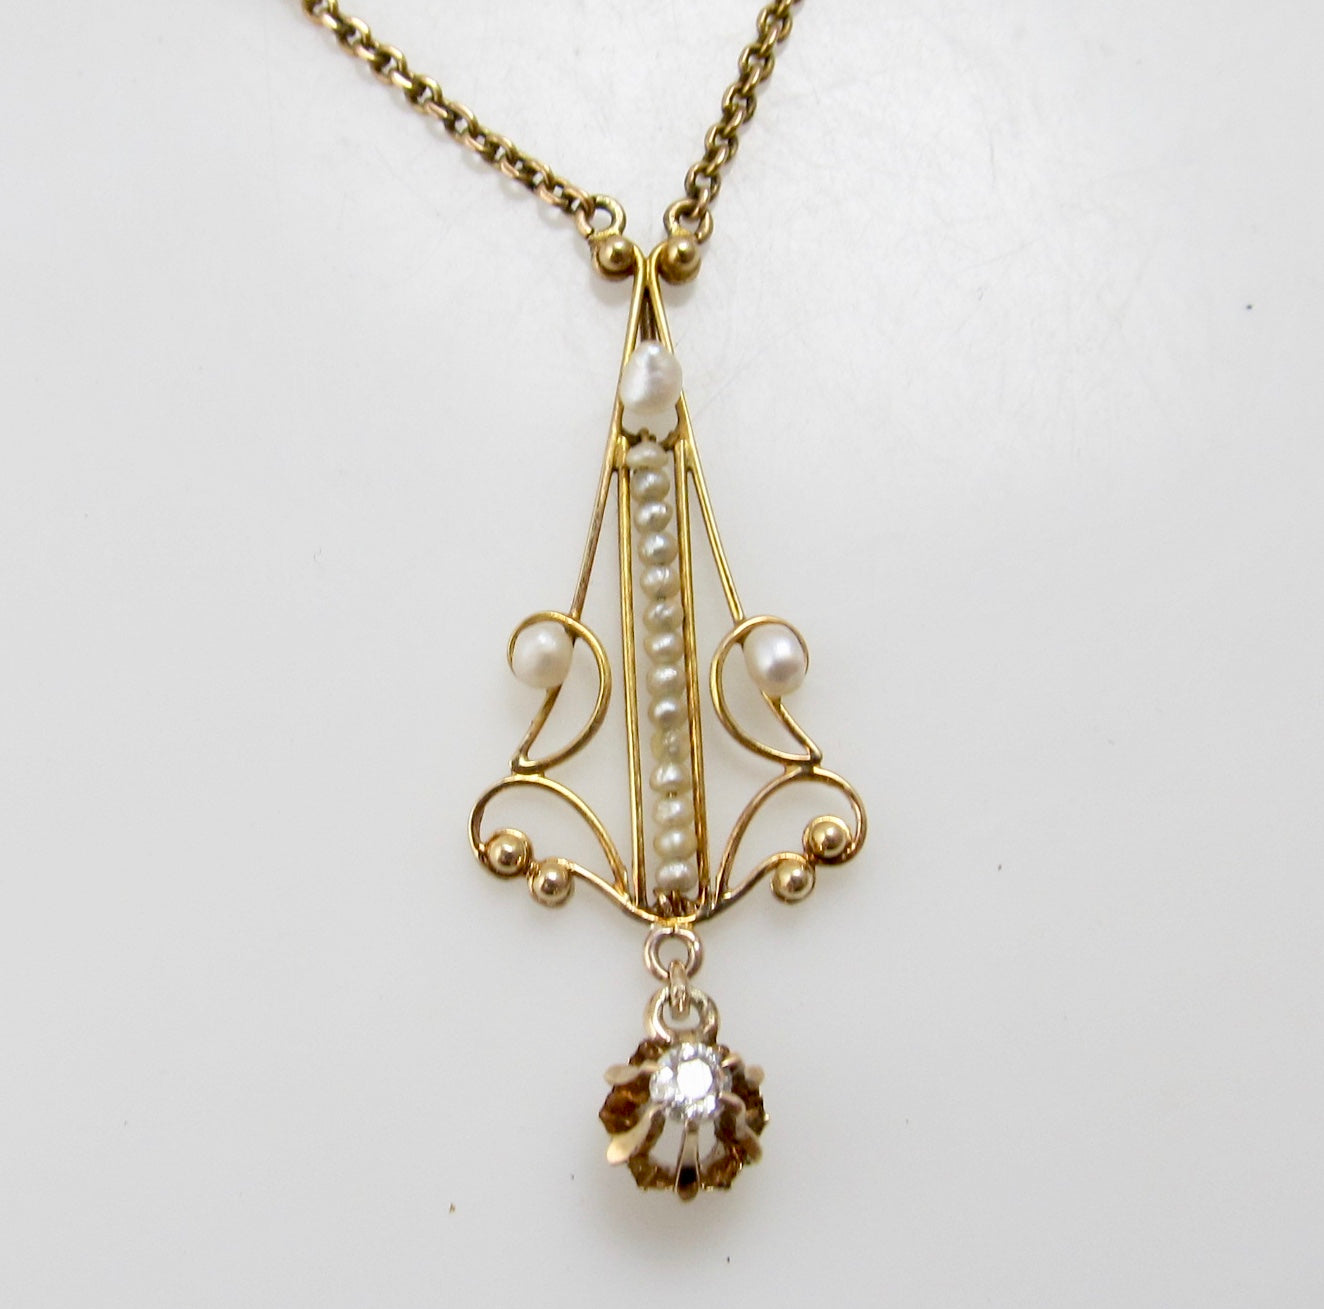 Edwardian pearl and diamond necklace